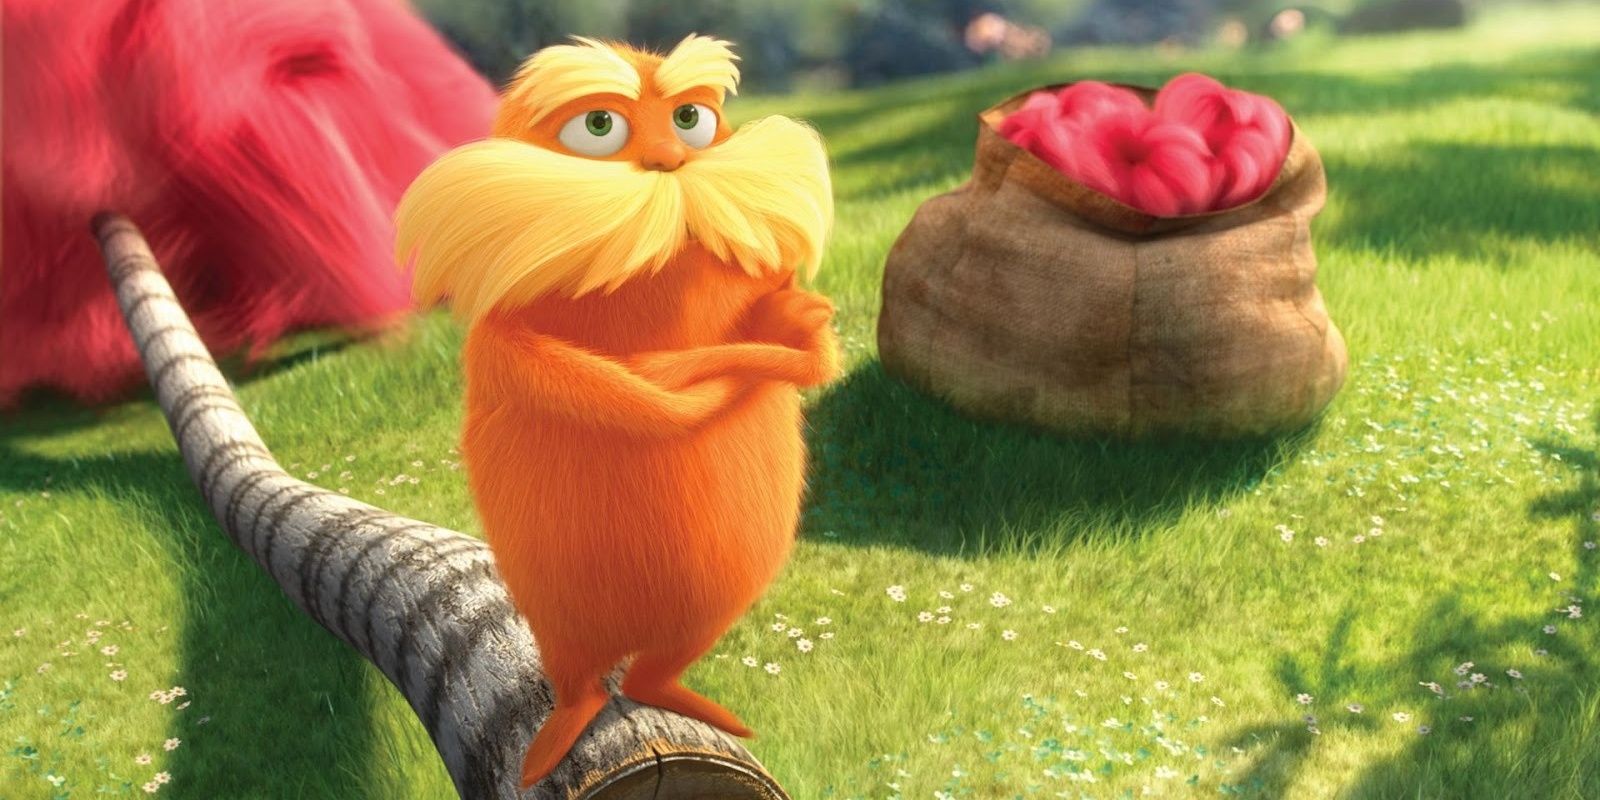 The Lorax standing on a tree in The Lorax.